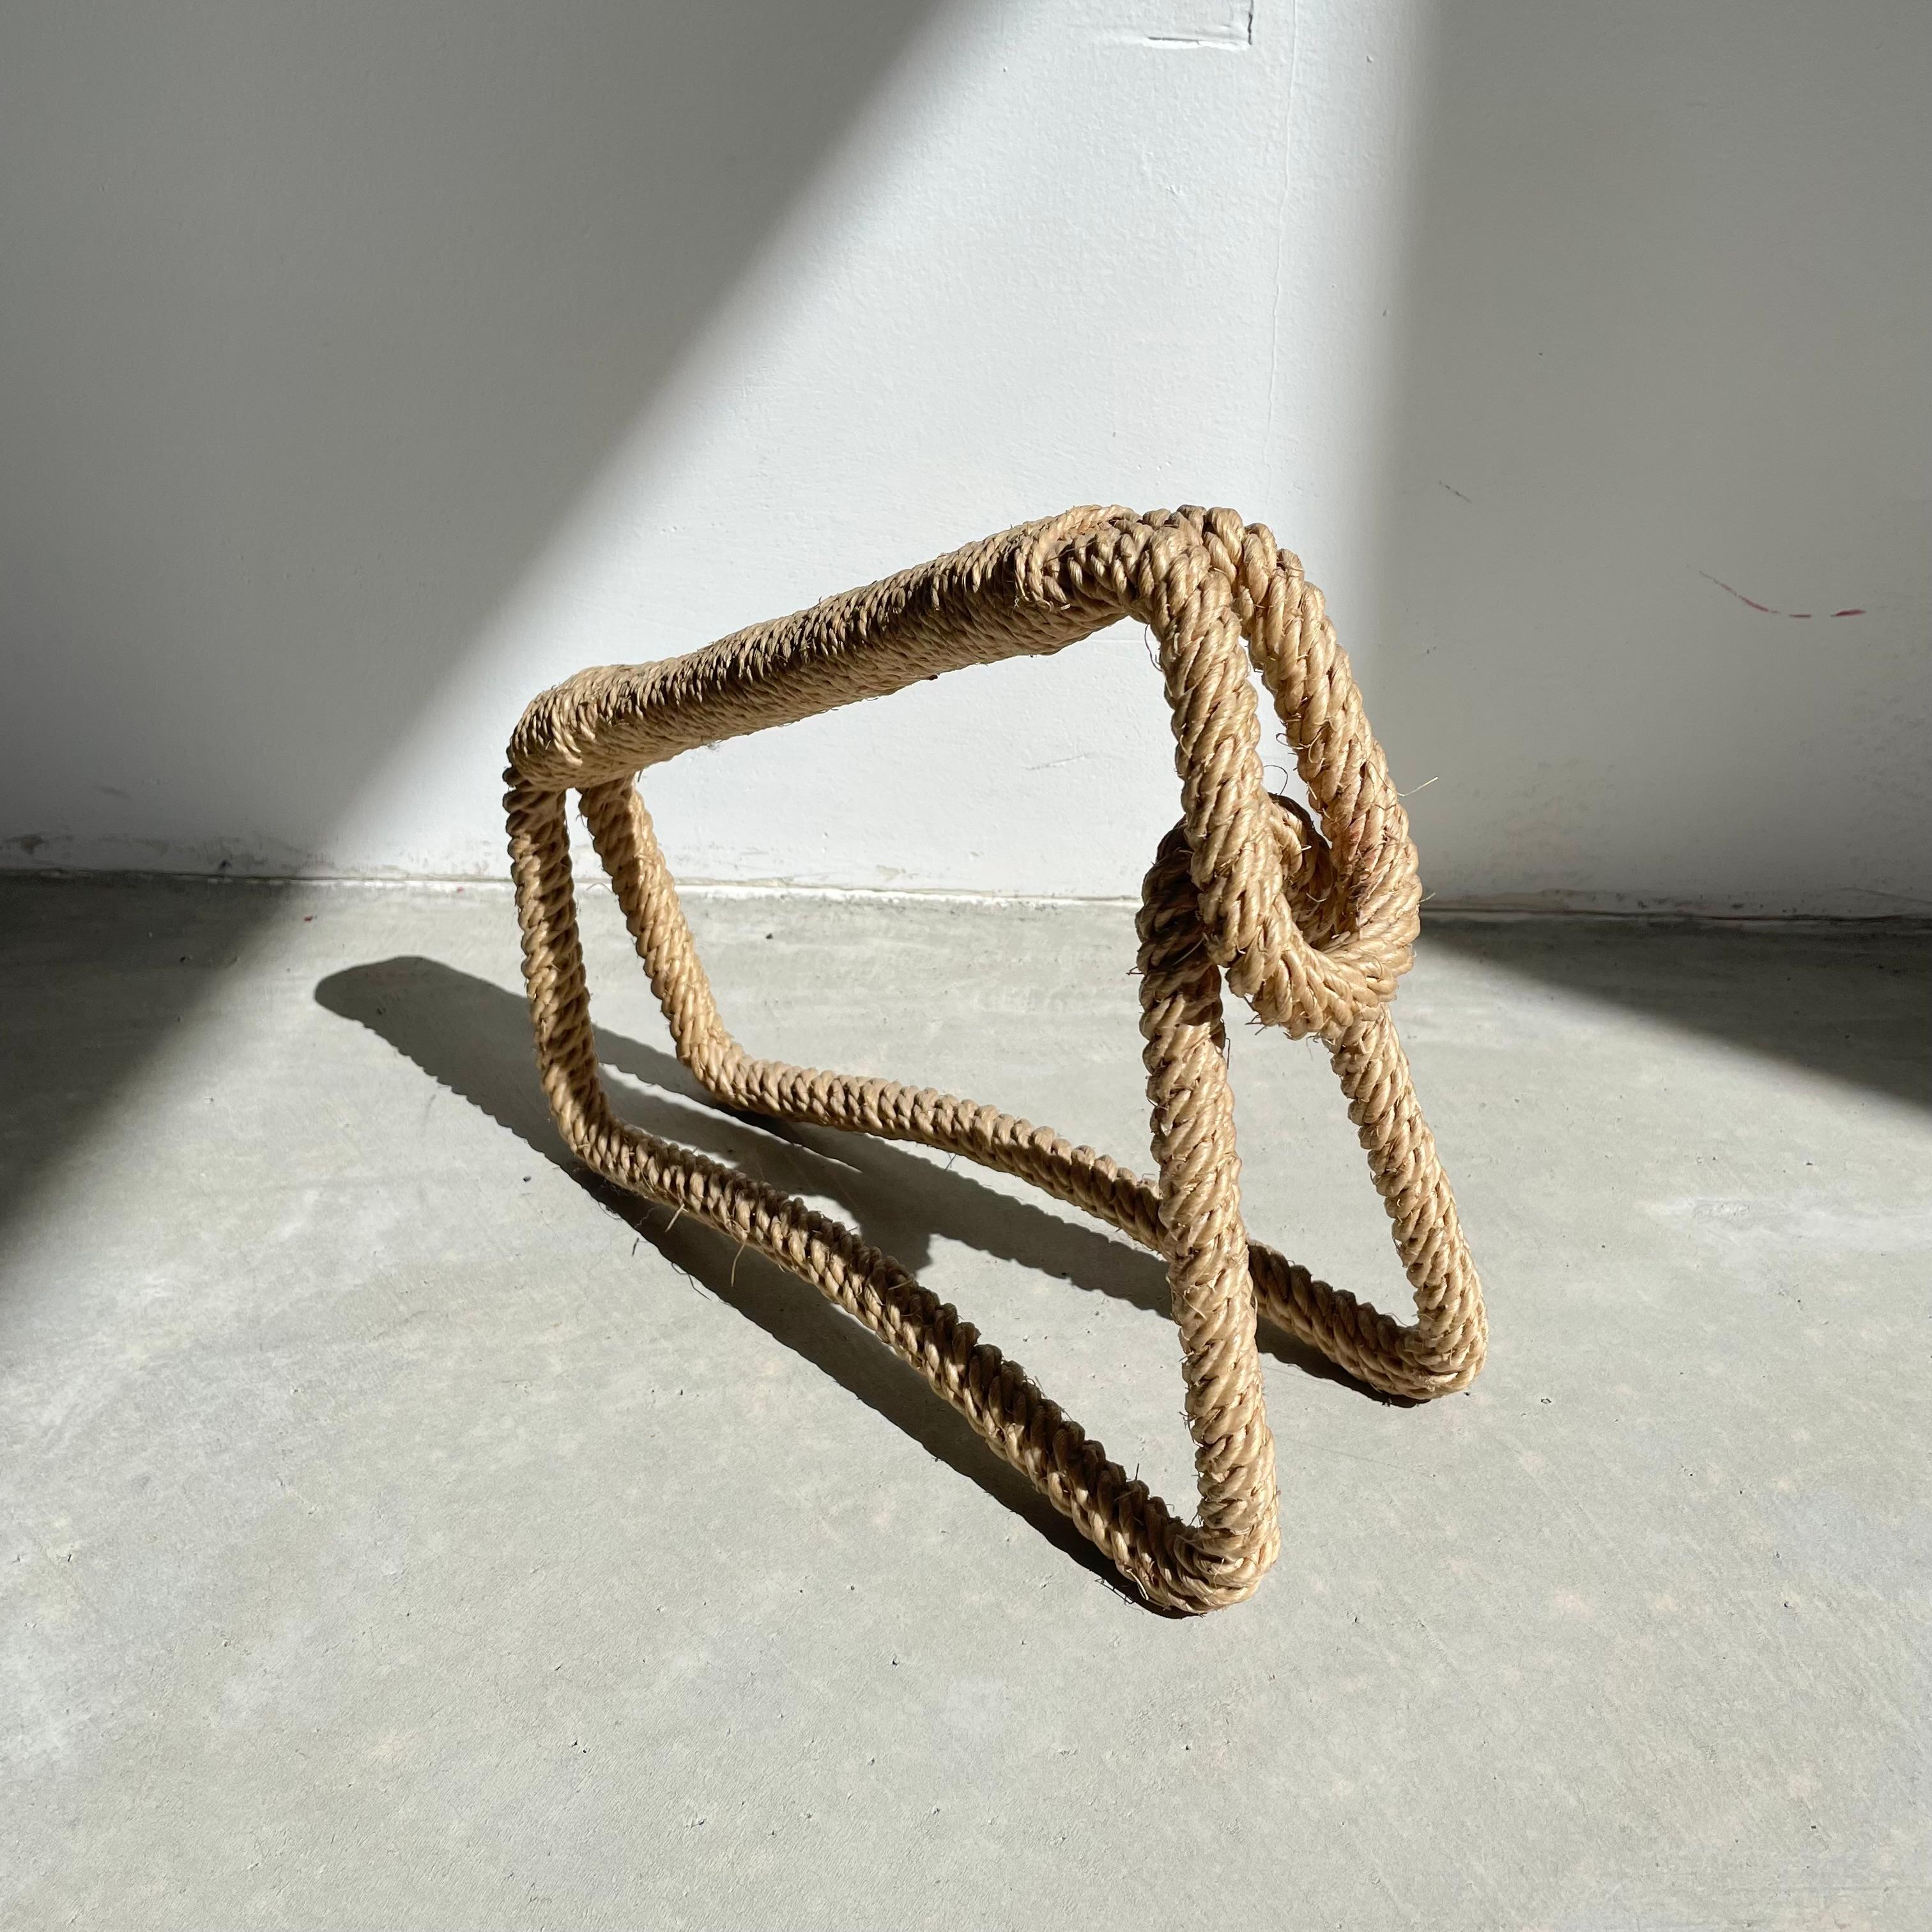 Unique rope wine bottle holder/carrier by French-Swiss husband-and-wife duo Audoux and Minet from France circa 1960.

Known for their playful and unique modernist designs, Audoux and Minet adopted a rustic style in their work, integrating Abaca hemp